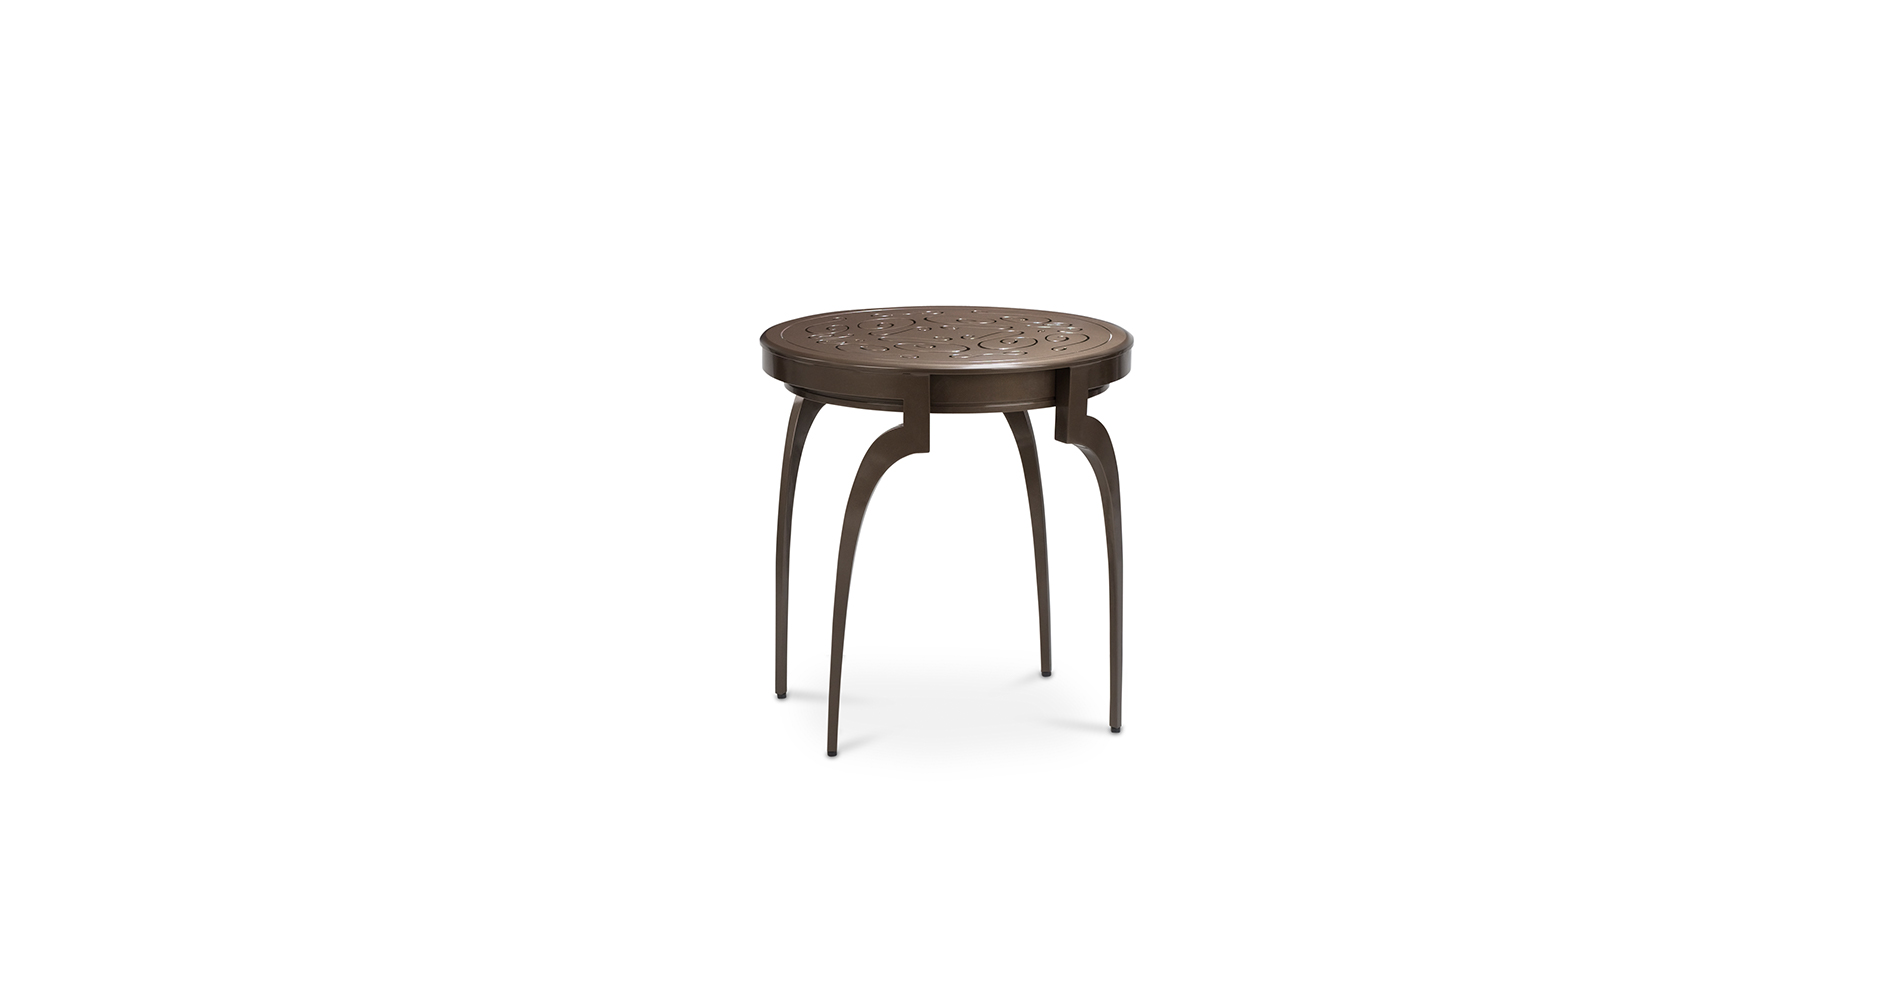 An image of Totem Side Table